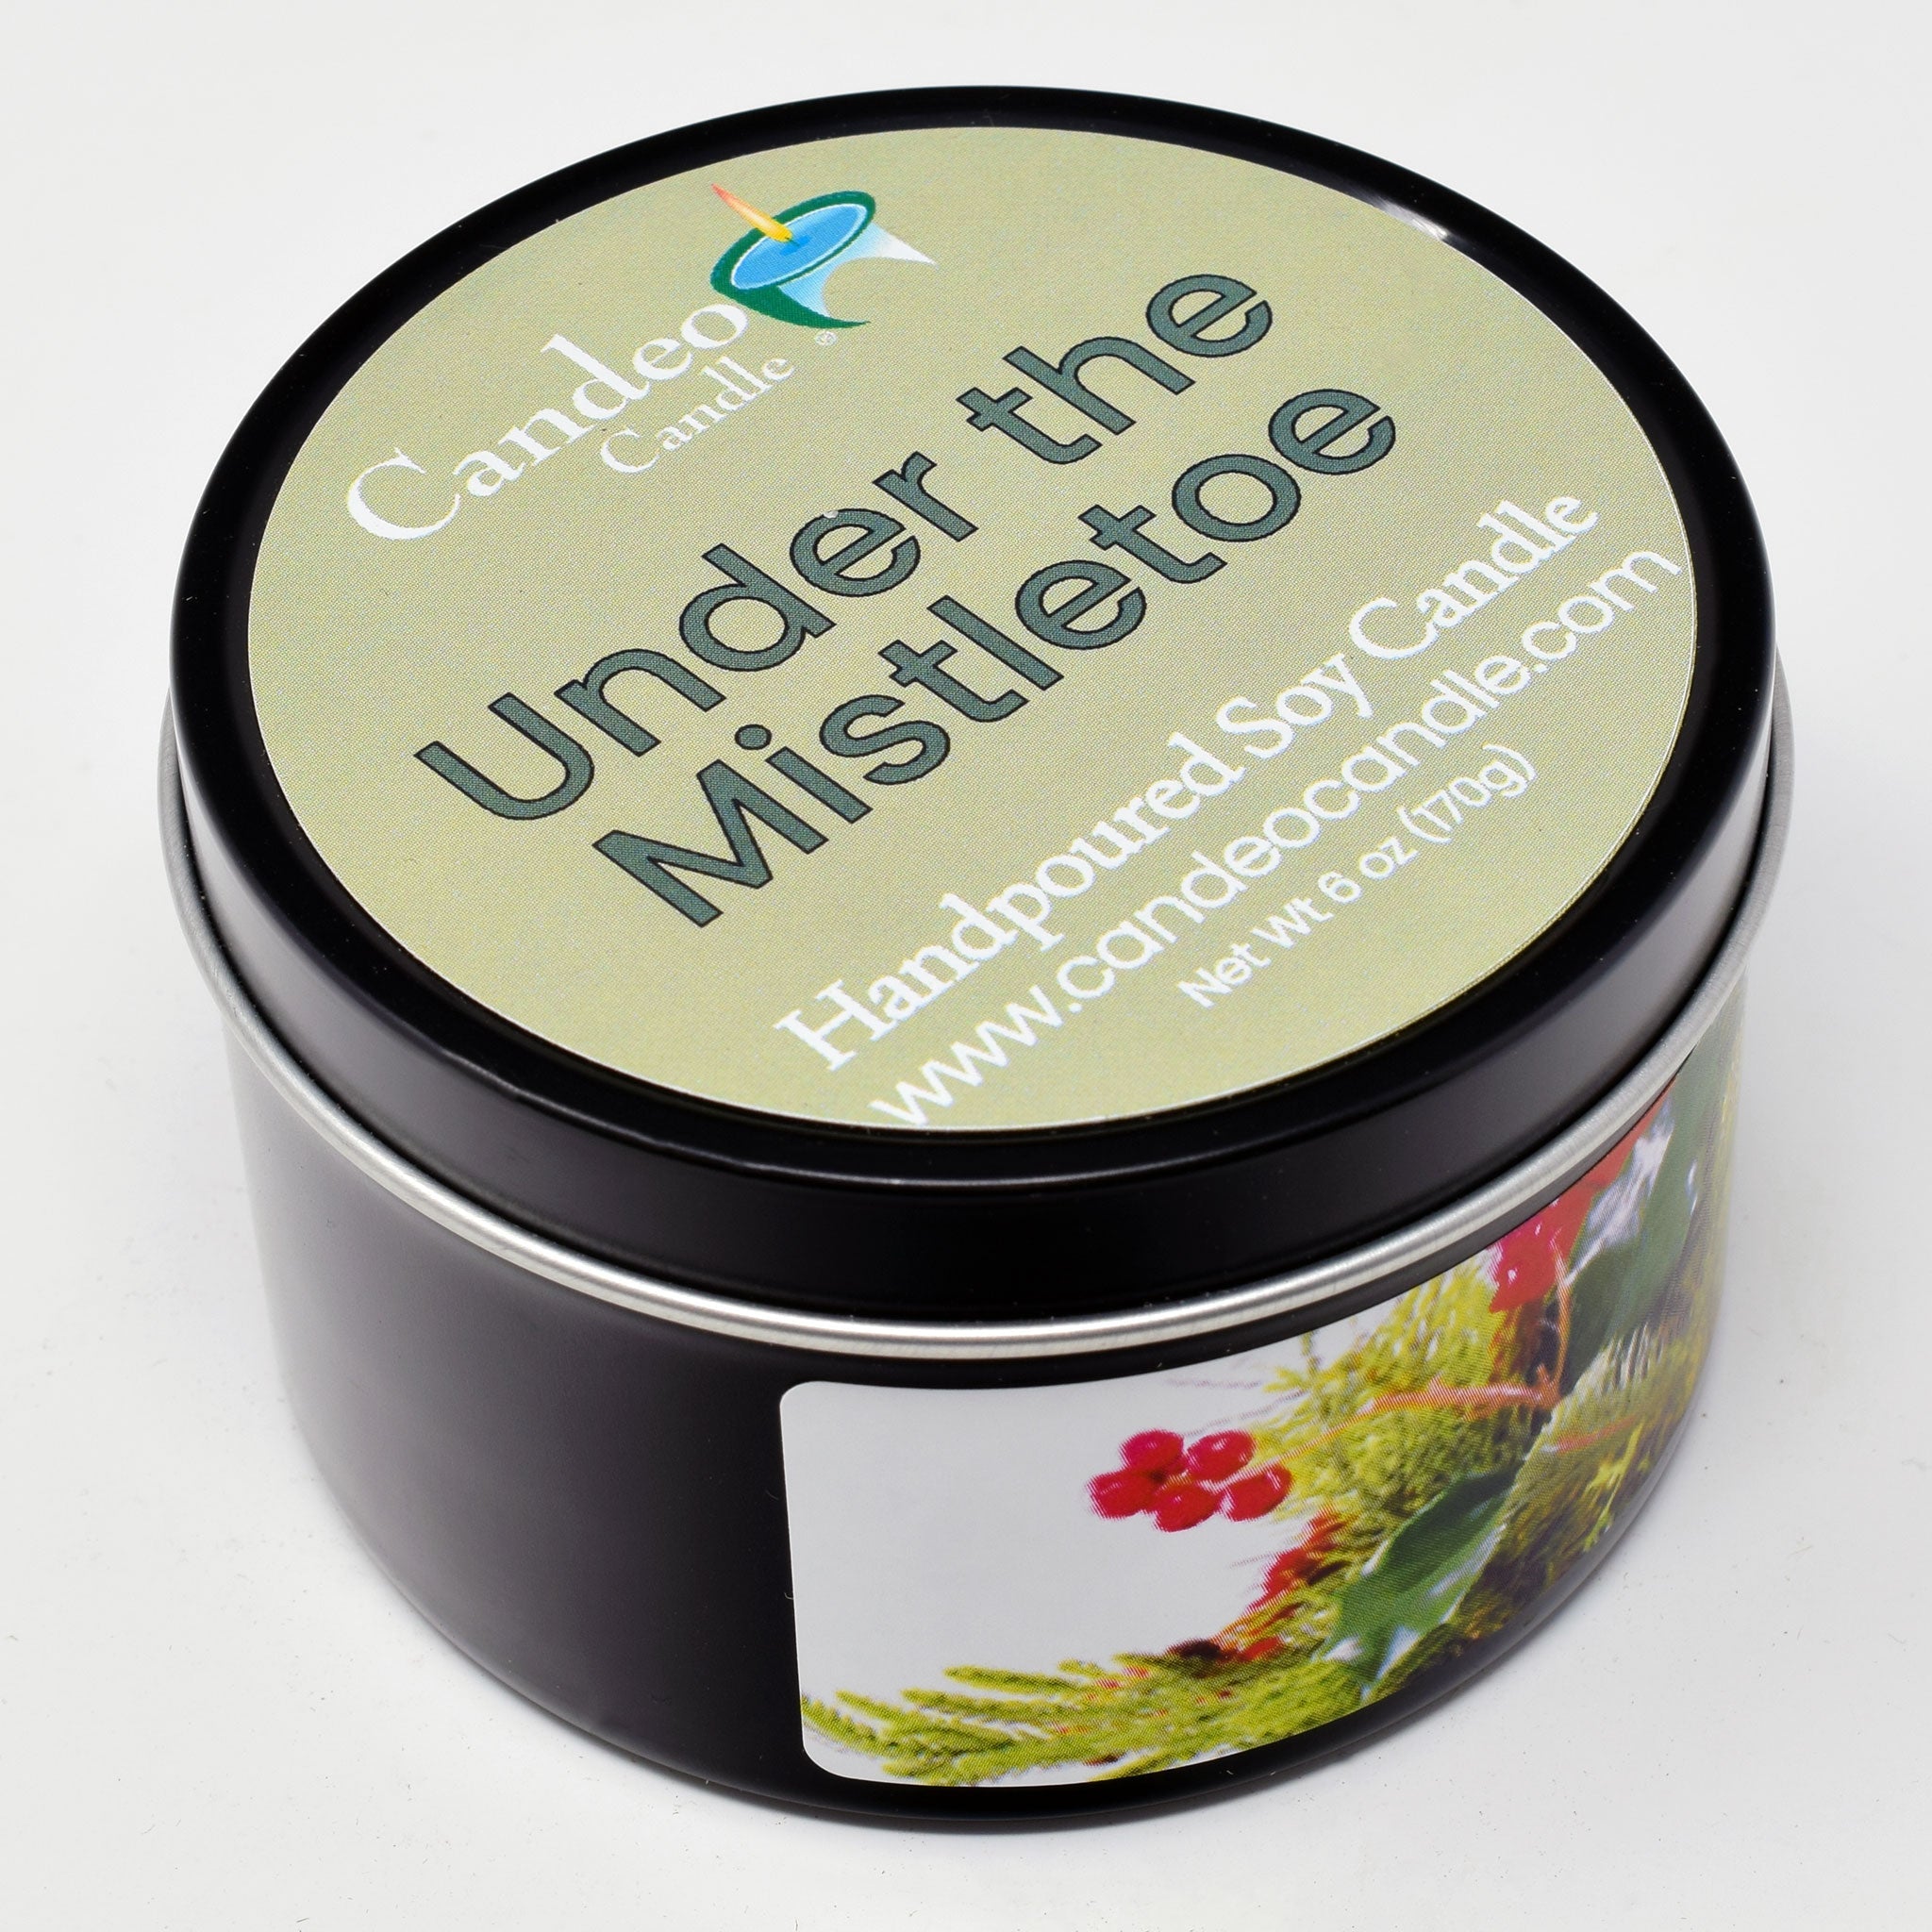 Under the Mistletoe, 6oz Soy Candle Tin - Candeo Candle